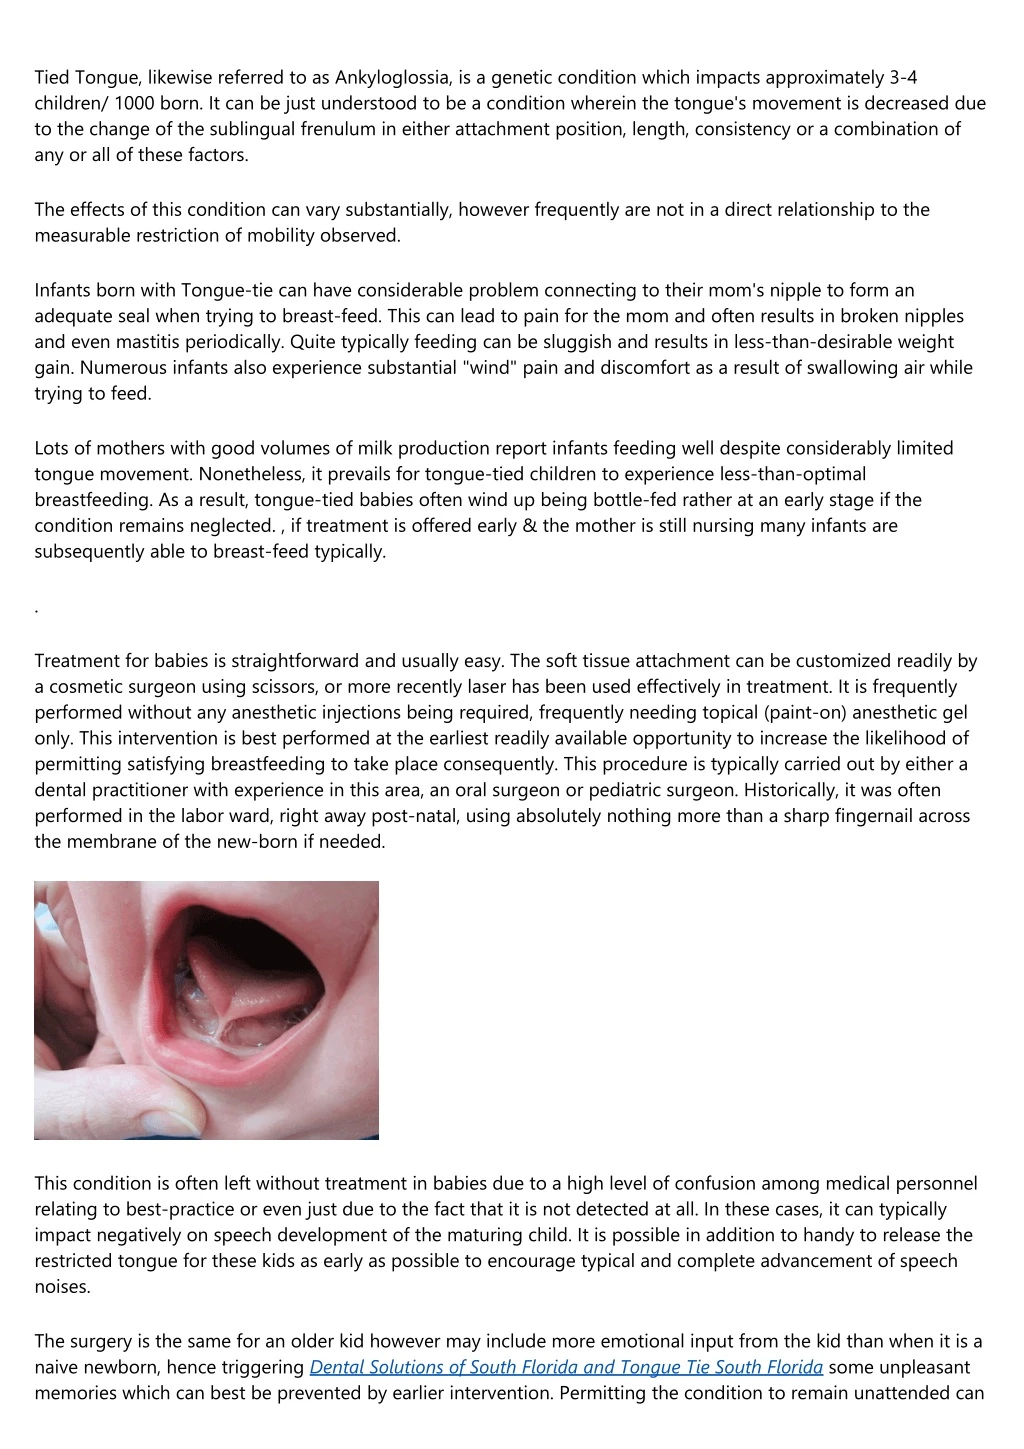 tied tongue likewise referred to as ankyloglossia